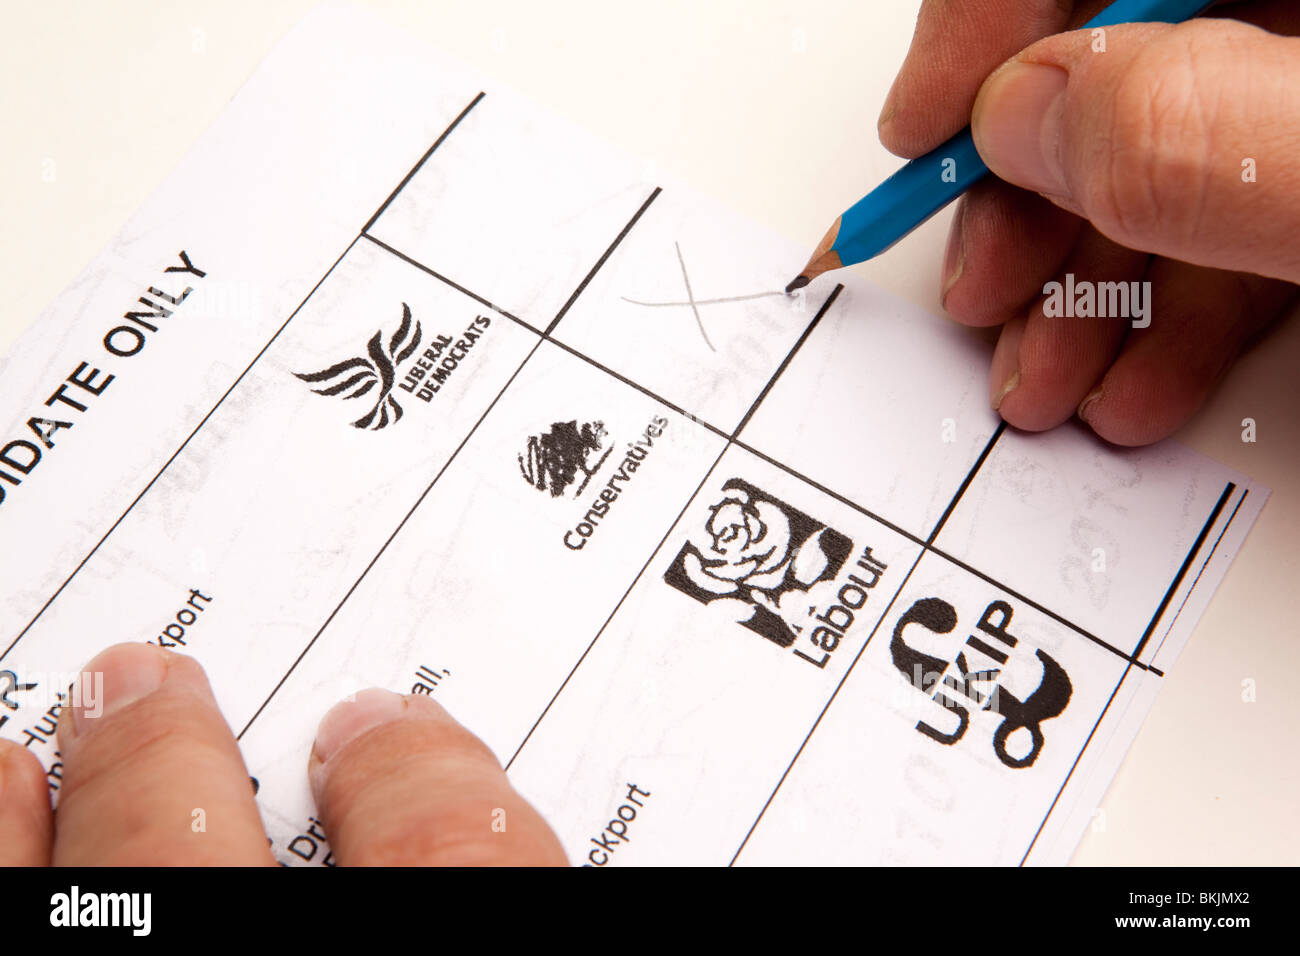 UK Elections man voting on ballot paper for Conservative candidate Stock Photo